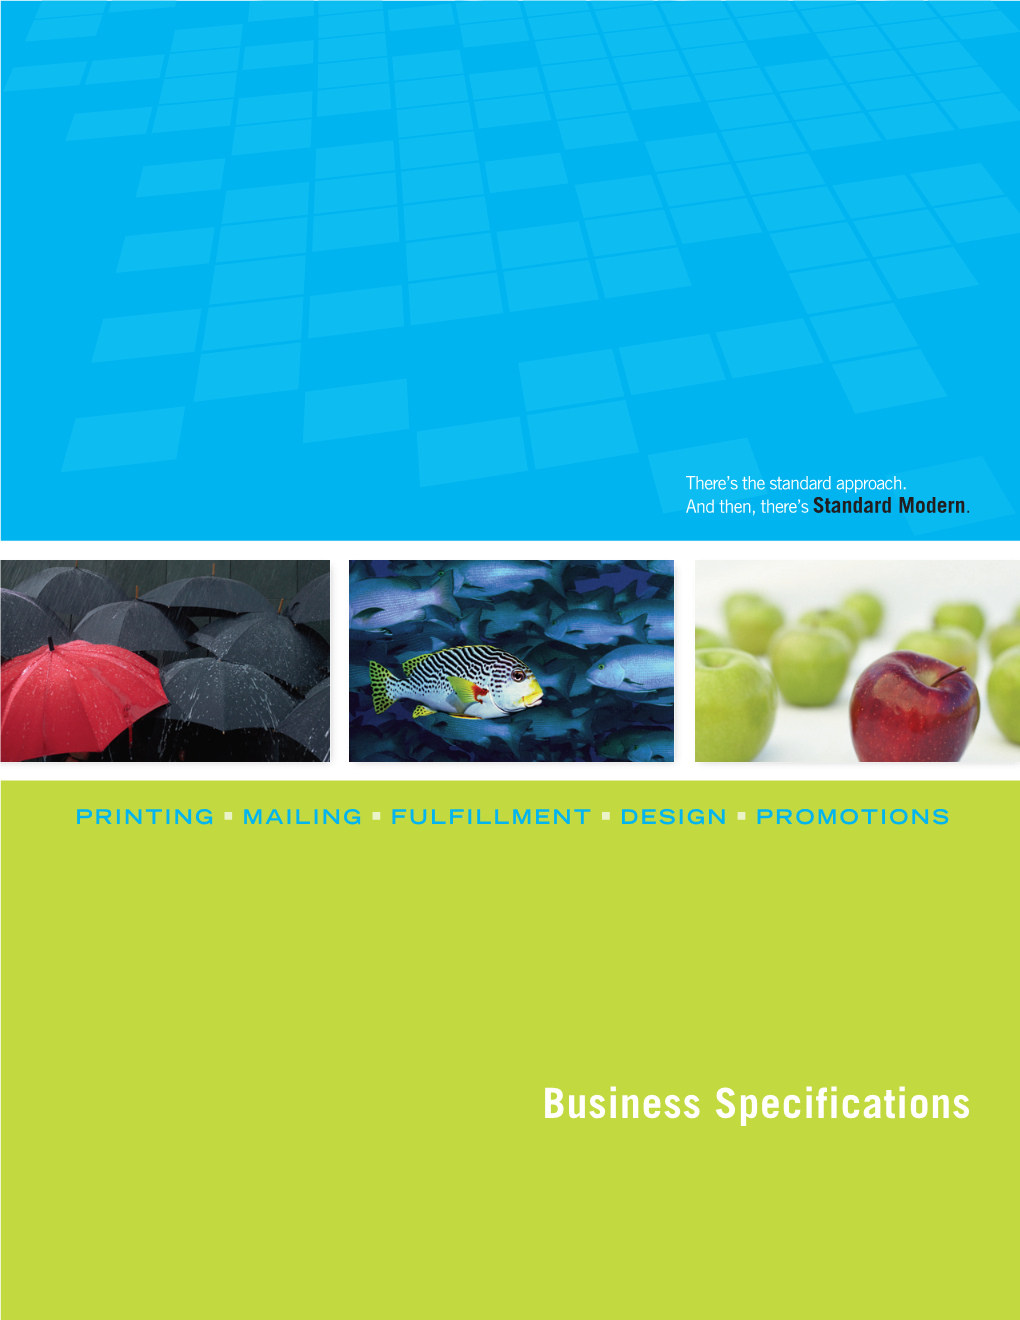 Business Specifications Print  Fulfillment  Marketing